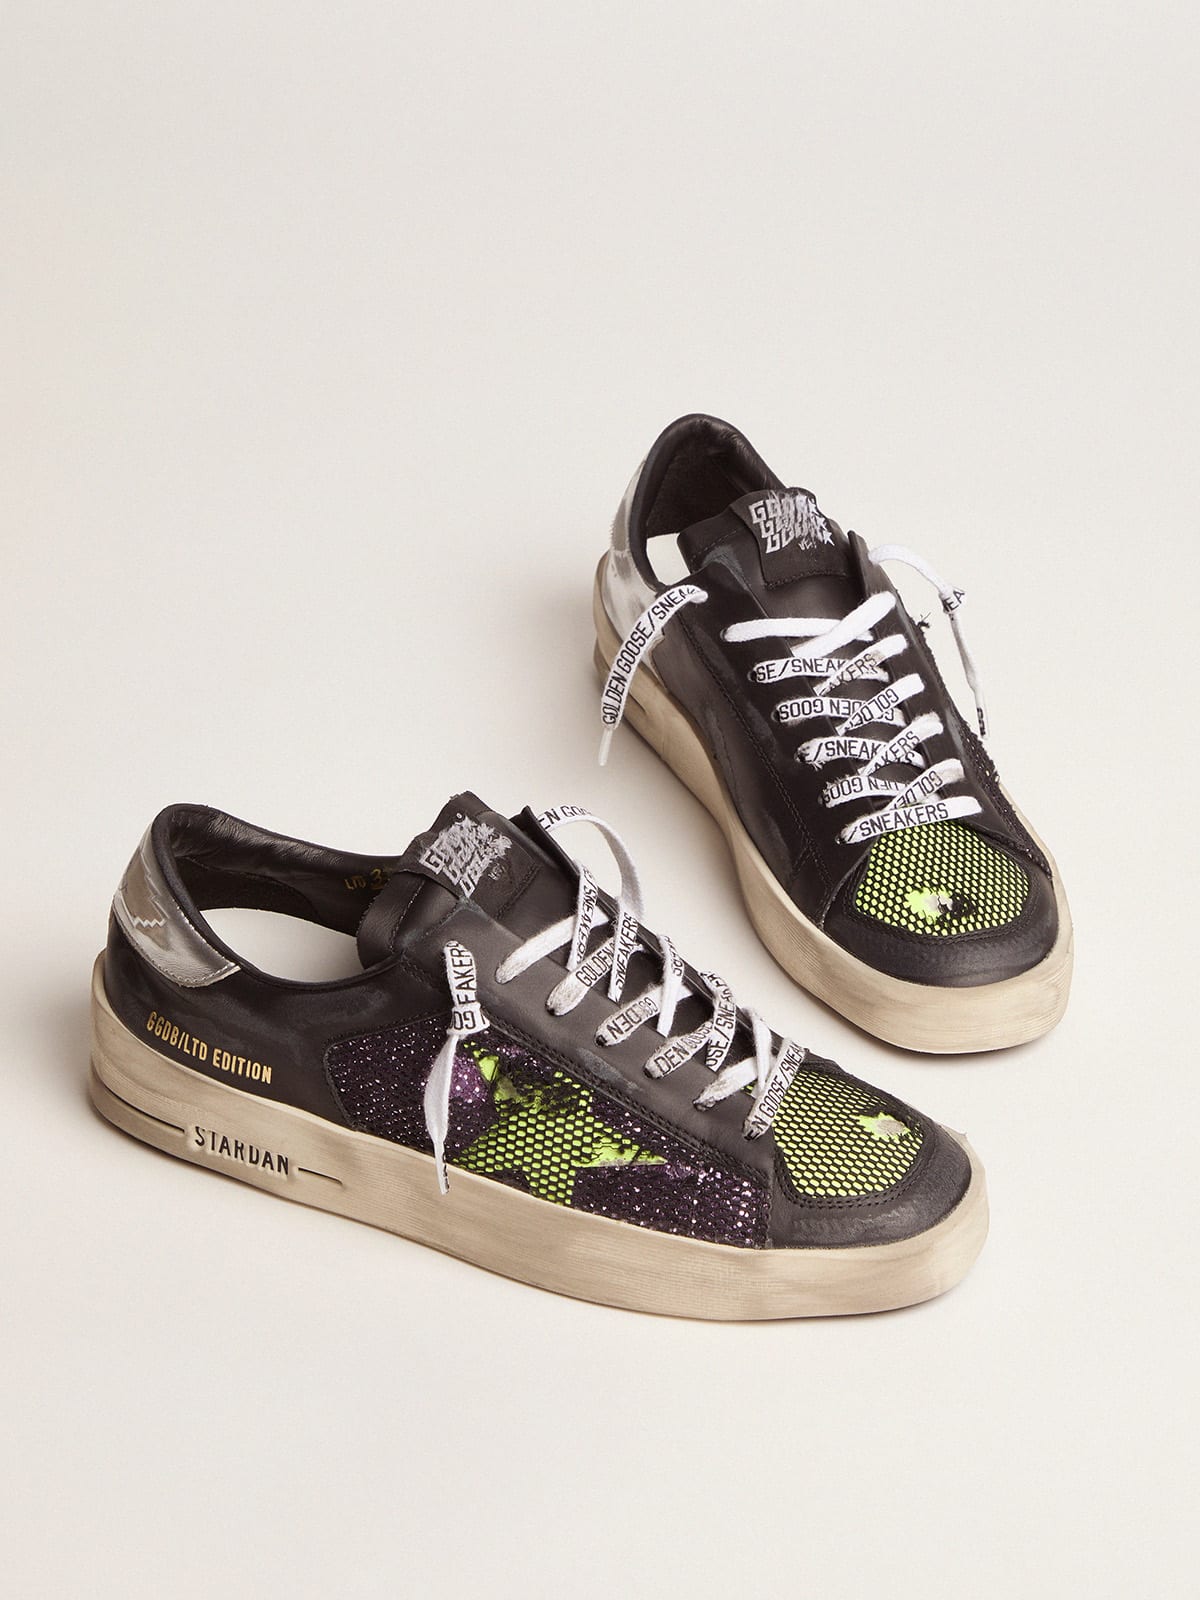 Golden Goose - Women’s LAB Limited Edition Stardan sneakers with glitter and fluorescent yellow details in 